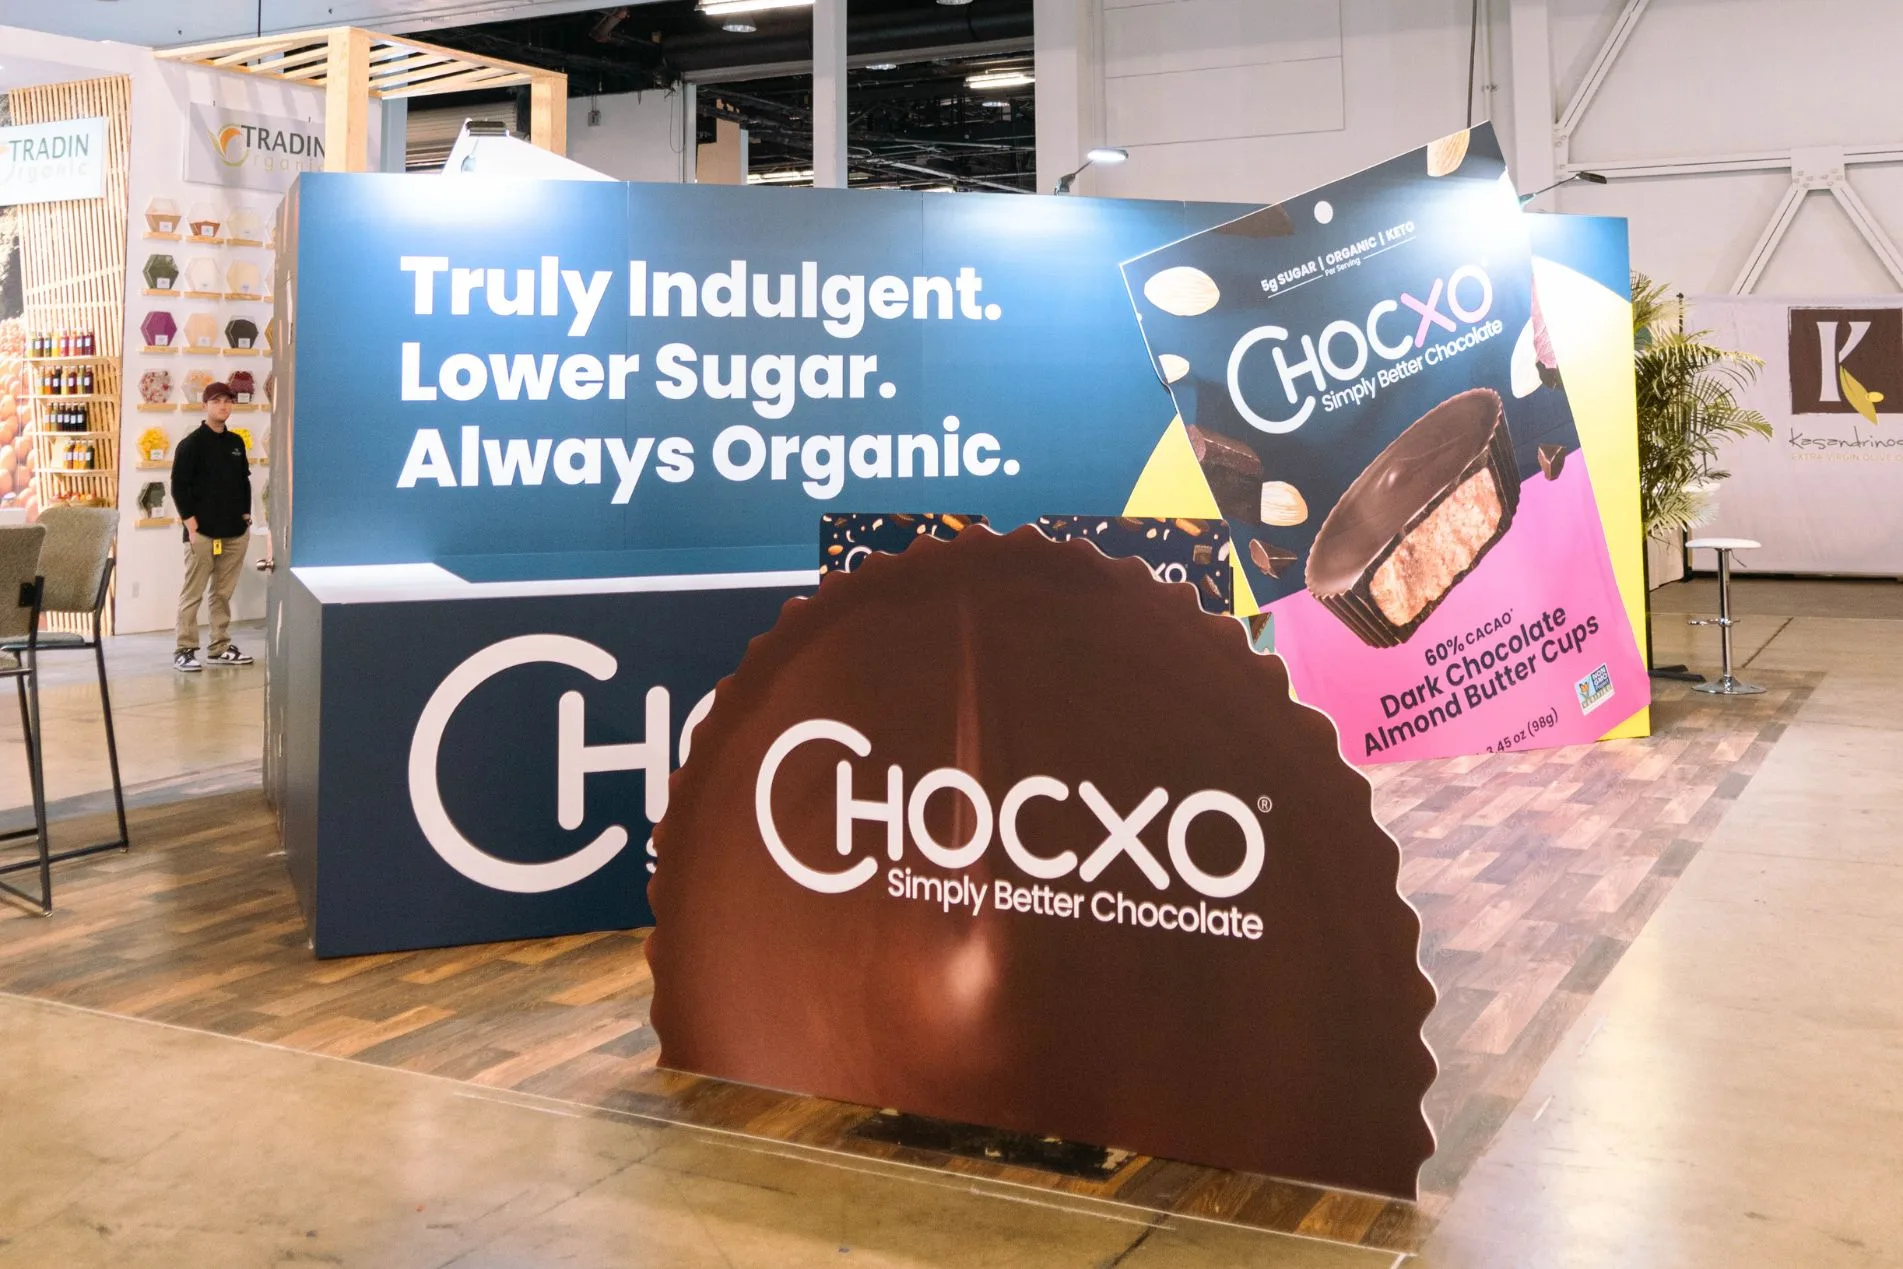 How a Custom Trade Show Display Benefits Your Business